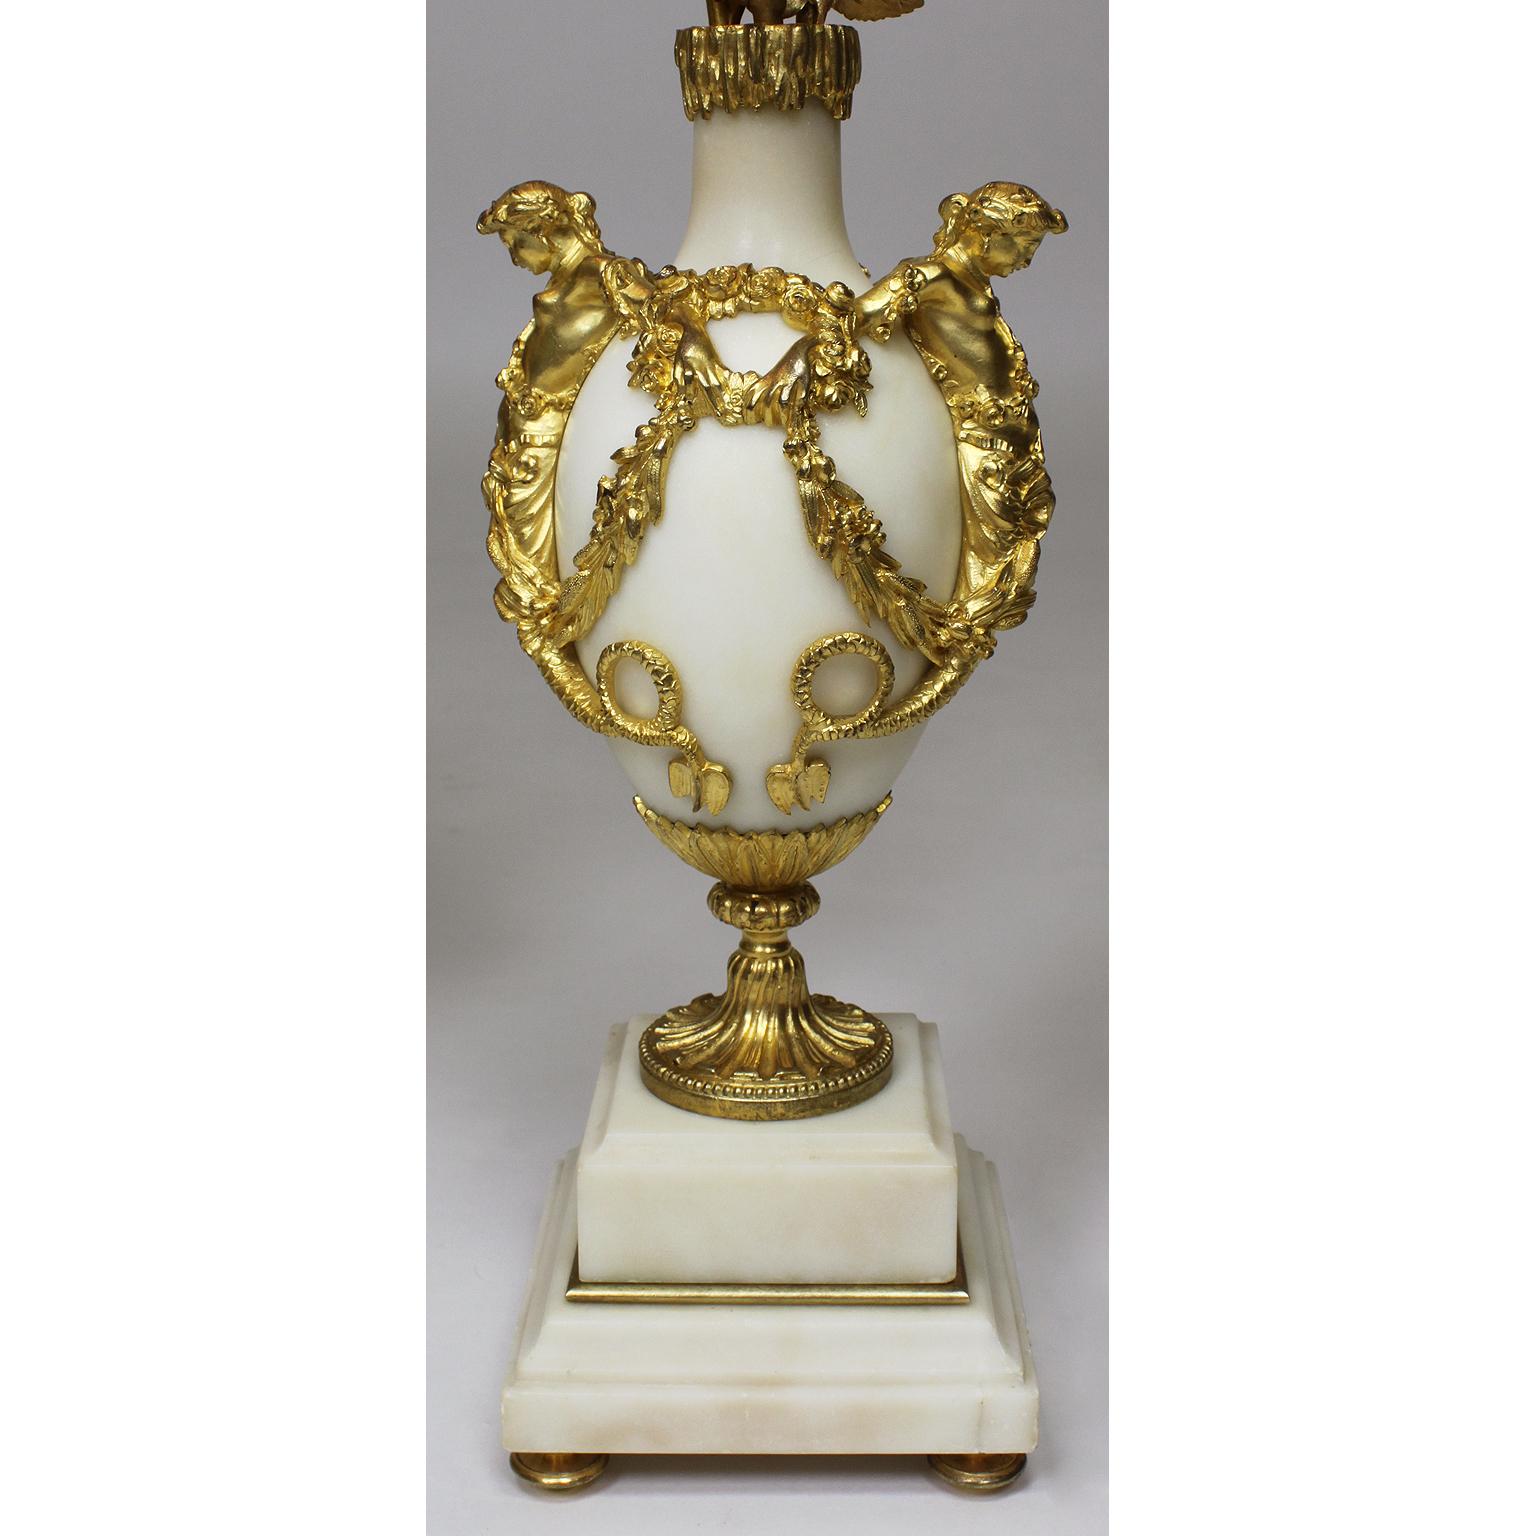 A fine pair of French 19th century marble and ormolu mounted figural urn three-light table lamp candelabra. The ovoid white marble body surmounted with a pair of mermaids holding hands with floral wreaths below an icicle neck below a three light